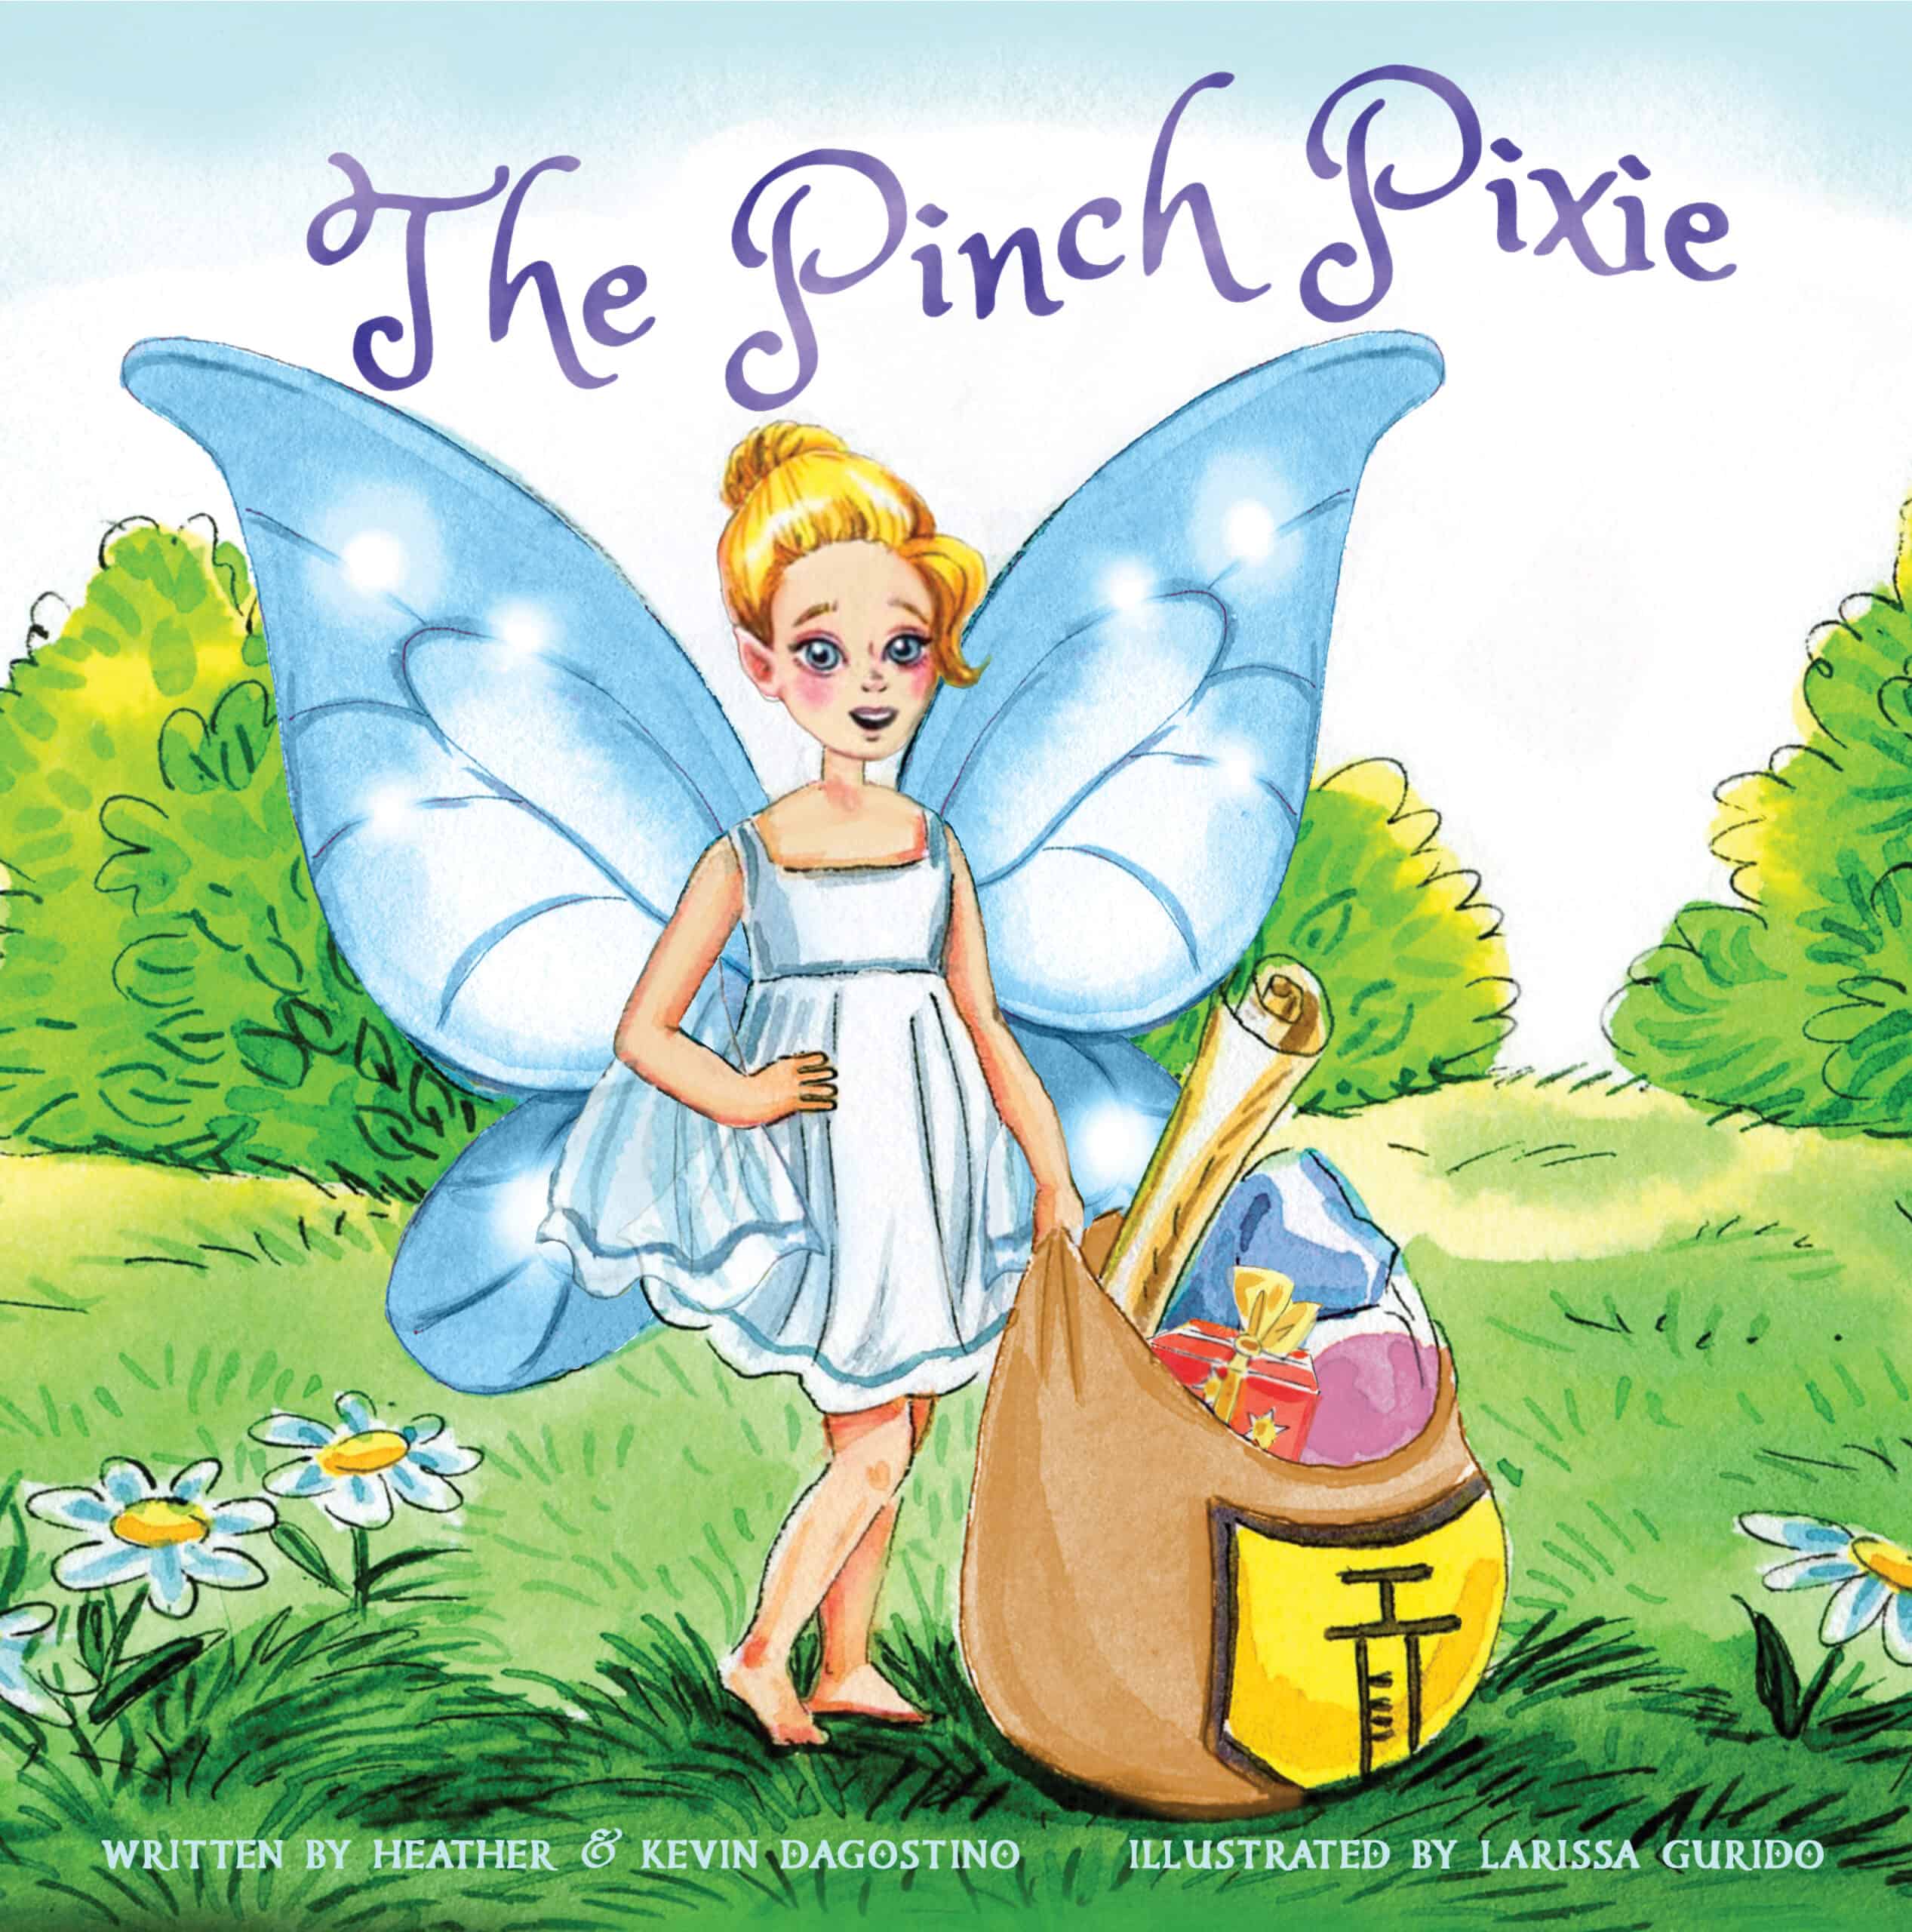 Introducing The Pinch Pixie: How One Local Couple Helps Ease Kids' Fears of Needles